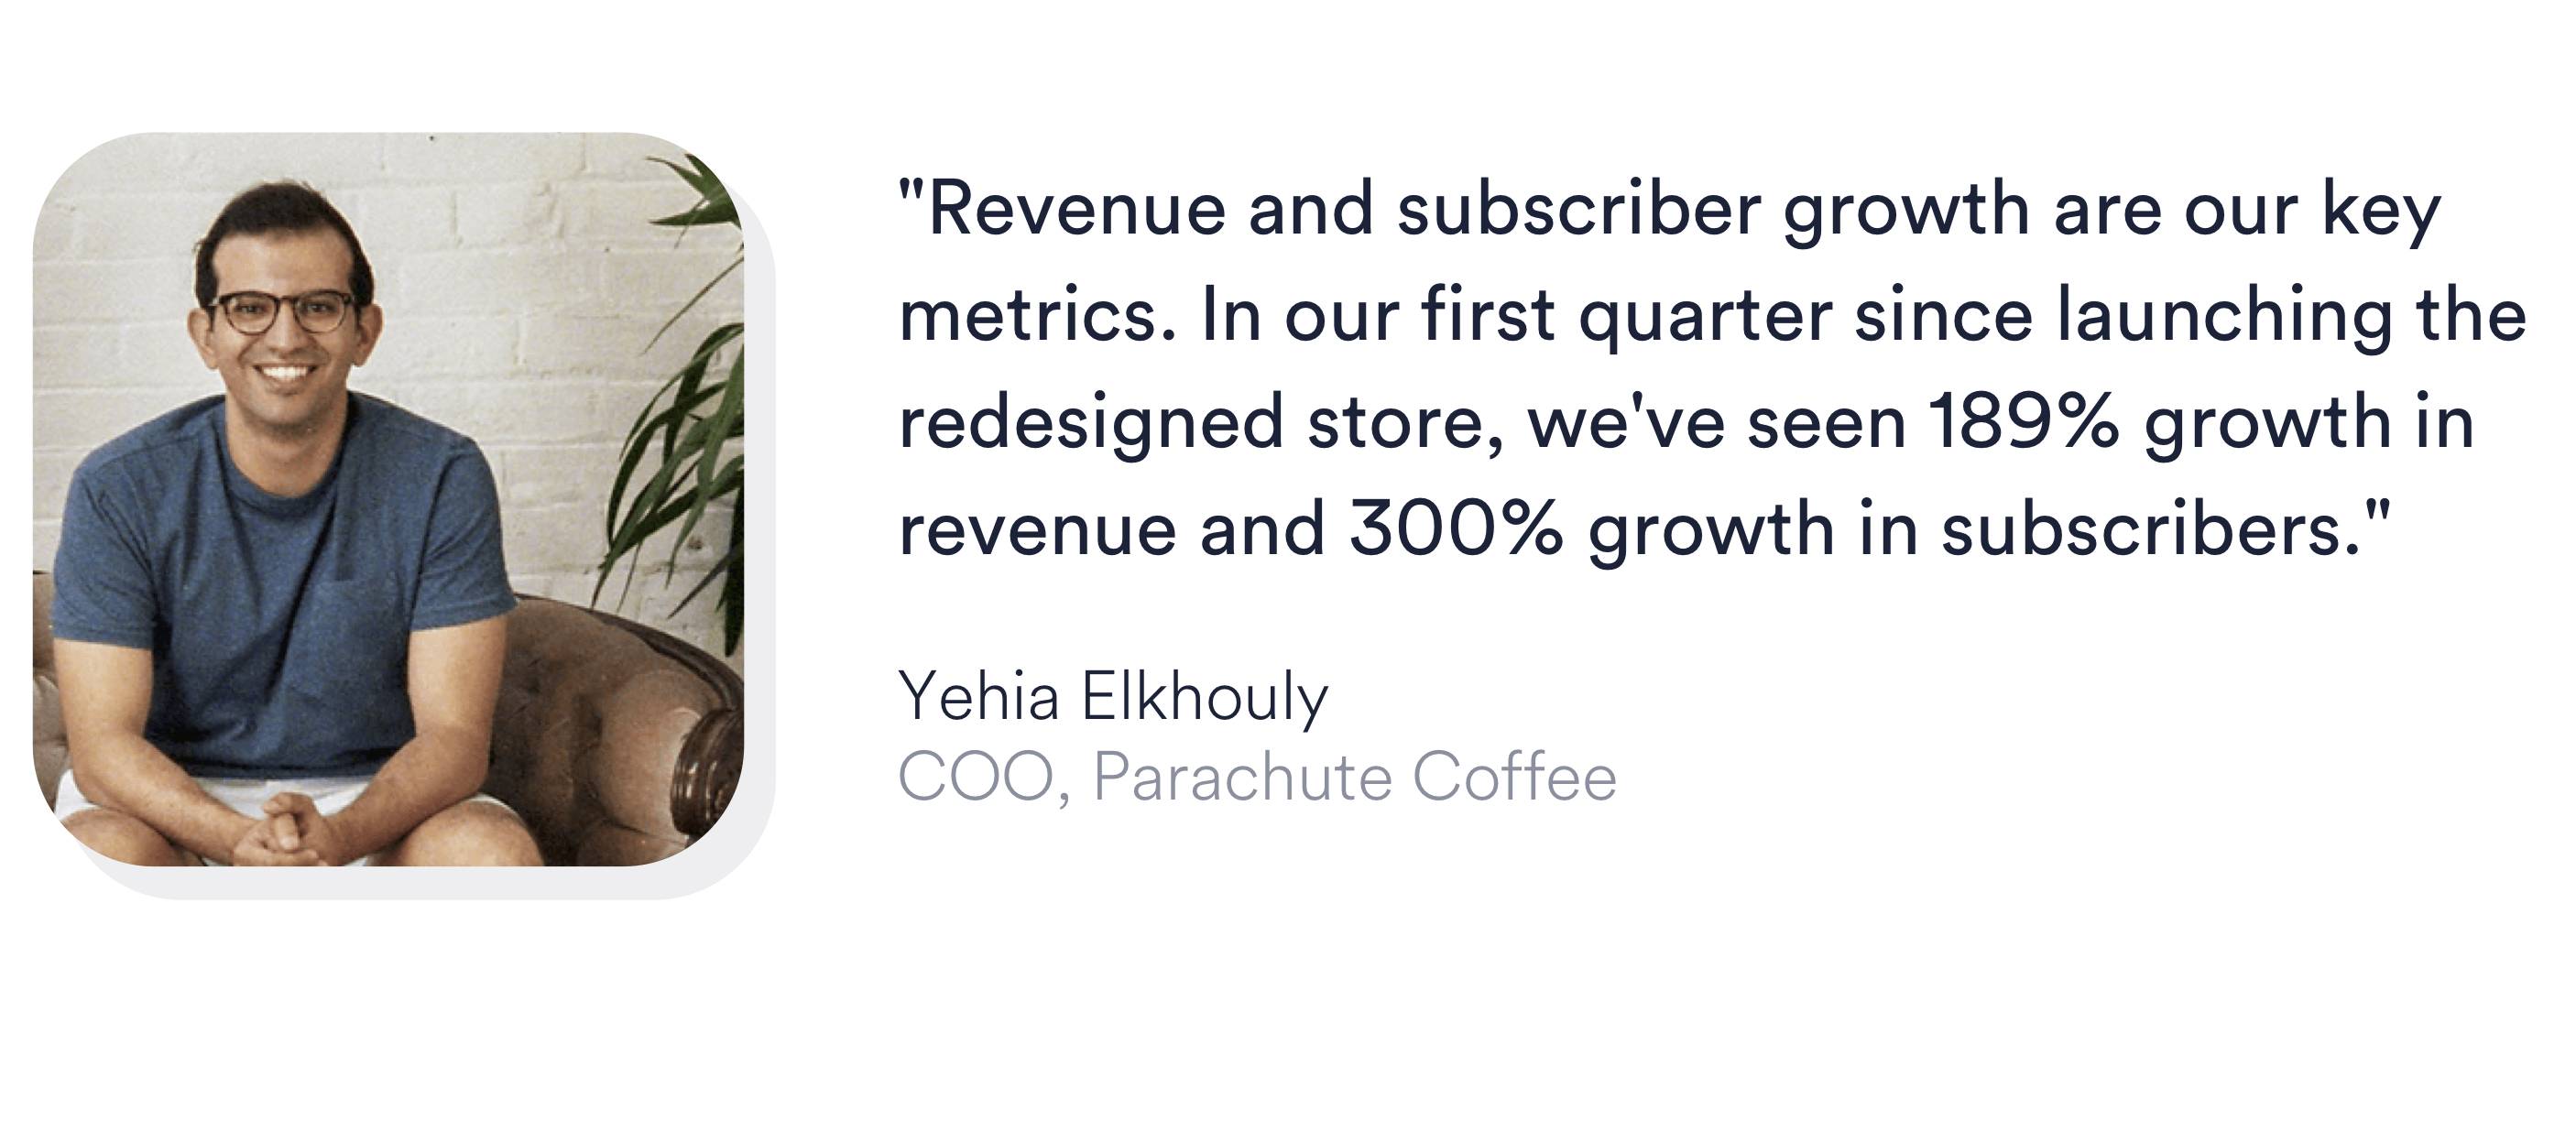 Pull quote reading revenue and subscriber growth are our key metrics. In our first quarter since launching the redesigned store, we've seen 189% growth in revenue and 300% growth in subscribers.